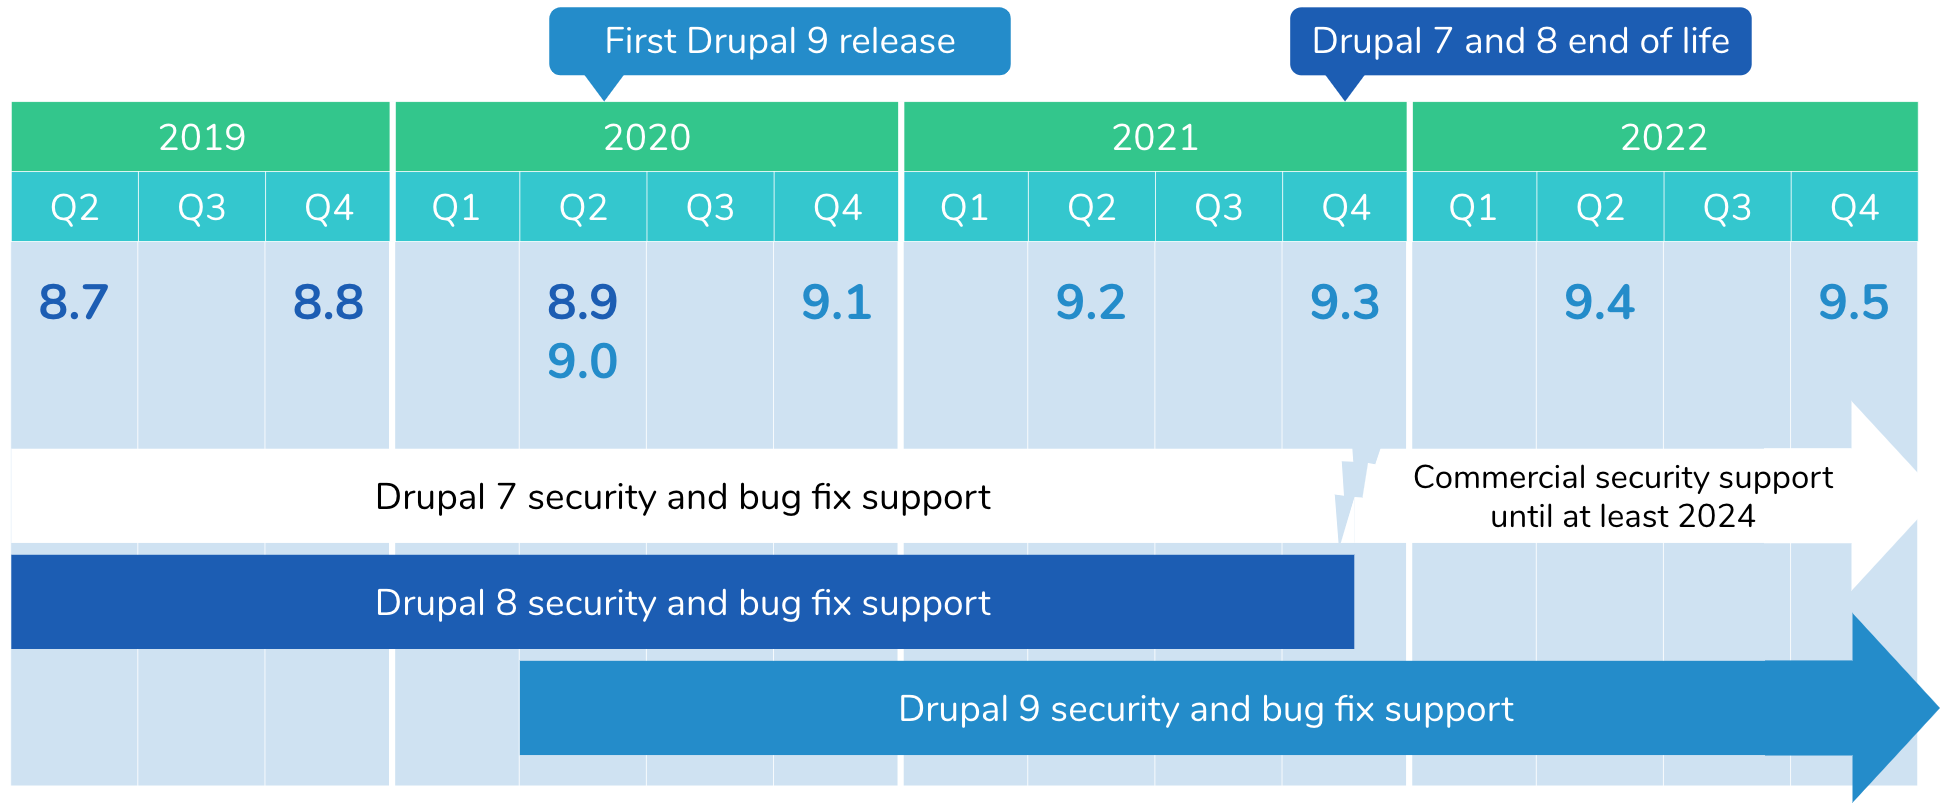 Chart showing security and bug fix support timeline for Drupal 7, 8, and 9